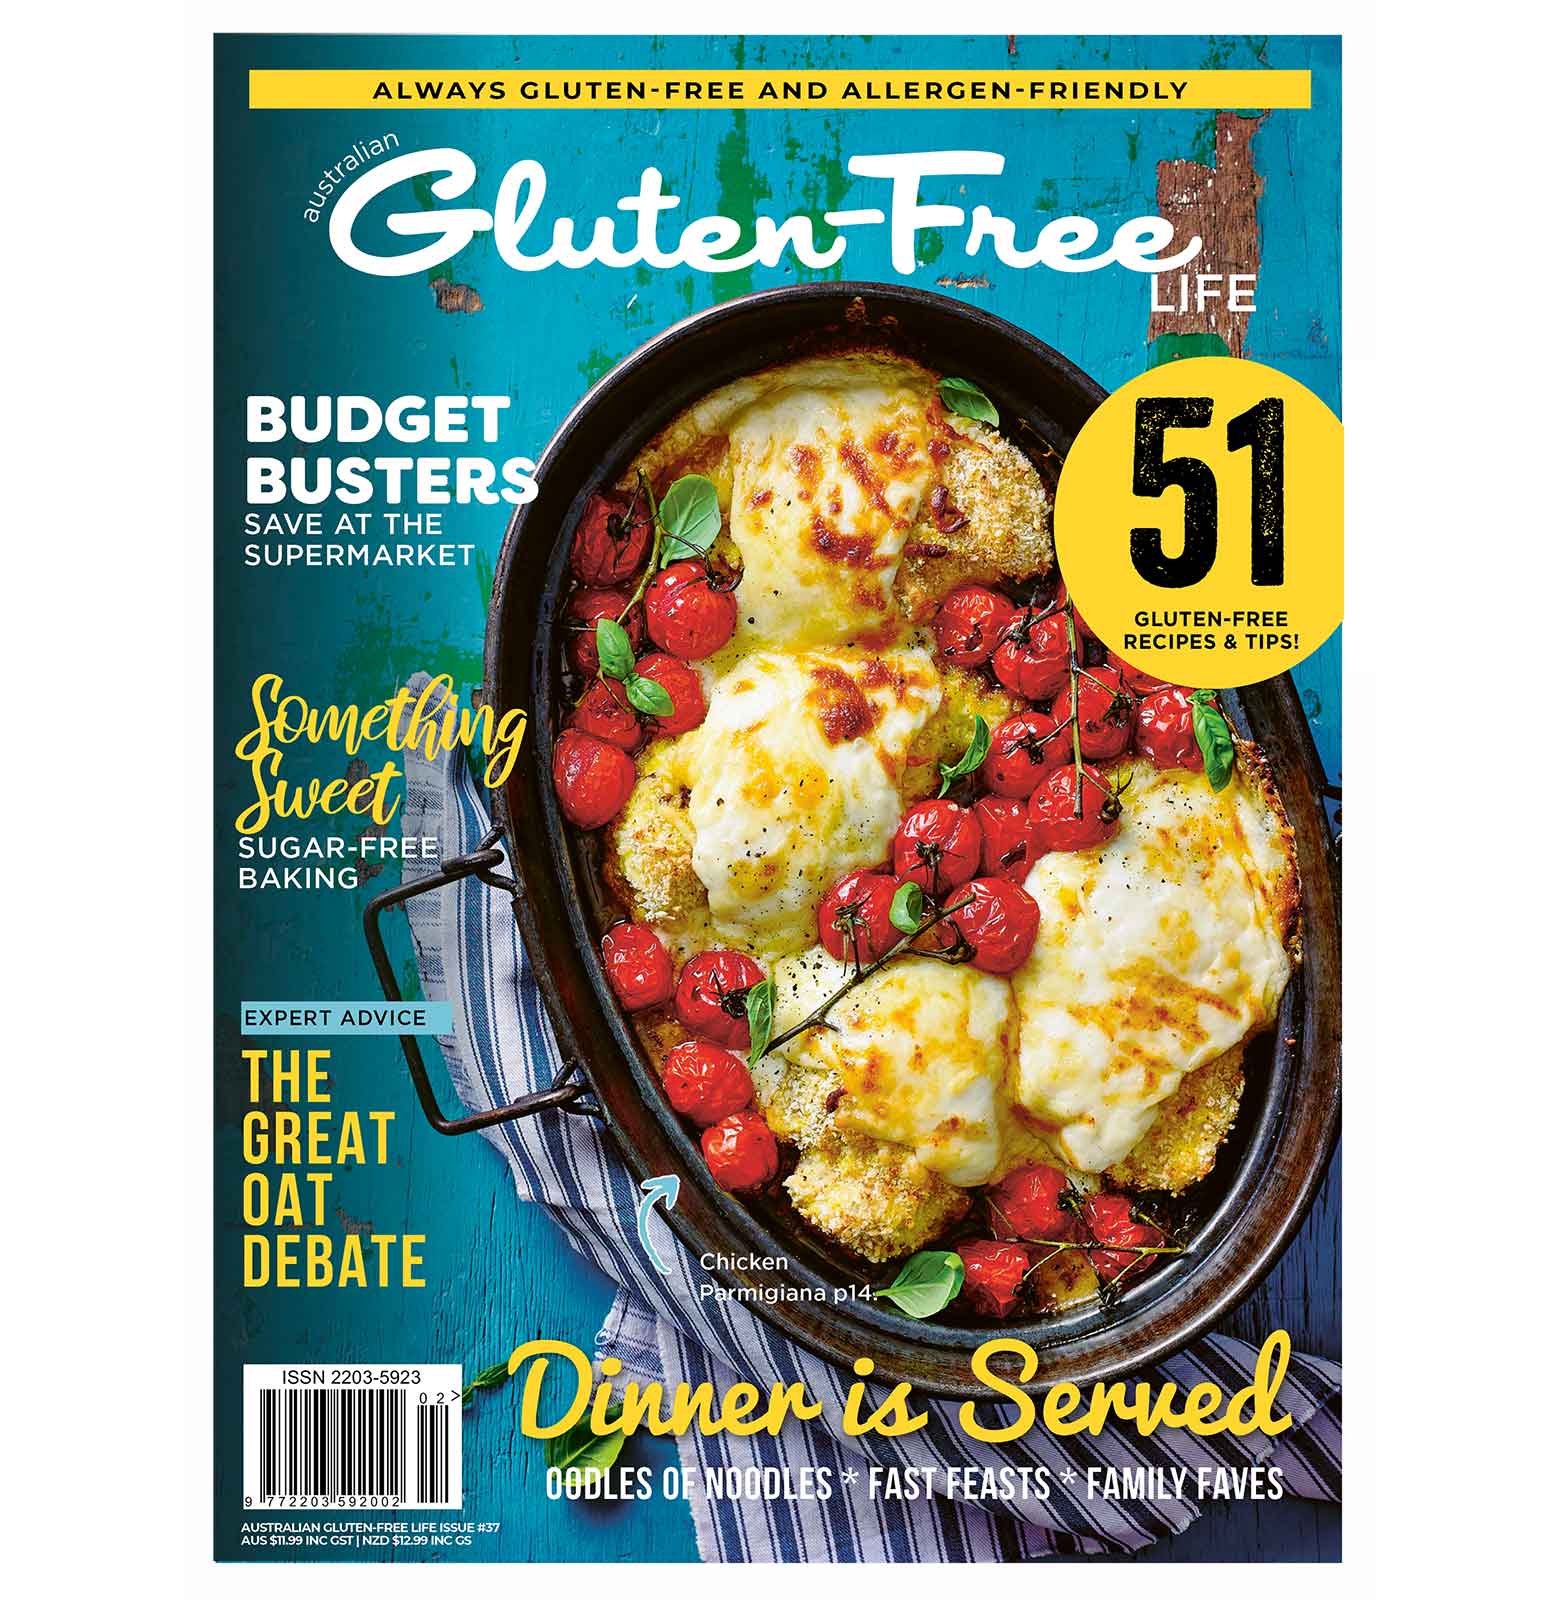 Cover of Australian Gluten-Free Life magazine issue 37 with an oval-shaped cast iron dish on the cover with four pieces of gluten-free chicken parmigiana, truss cherry tomatoes and fresh basil leaves inside. The dish is sitting on a blue and white striped cloth.